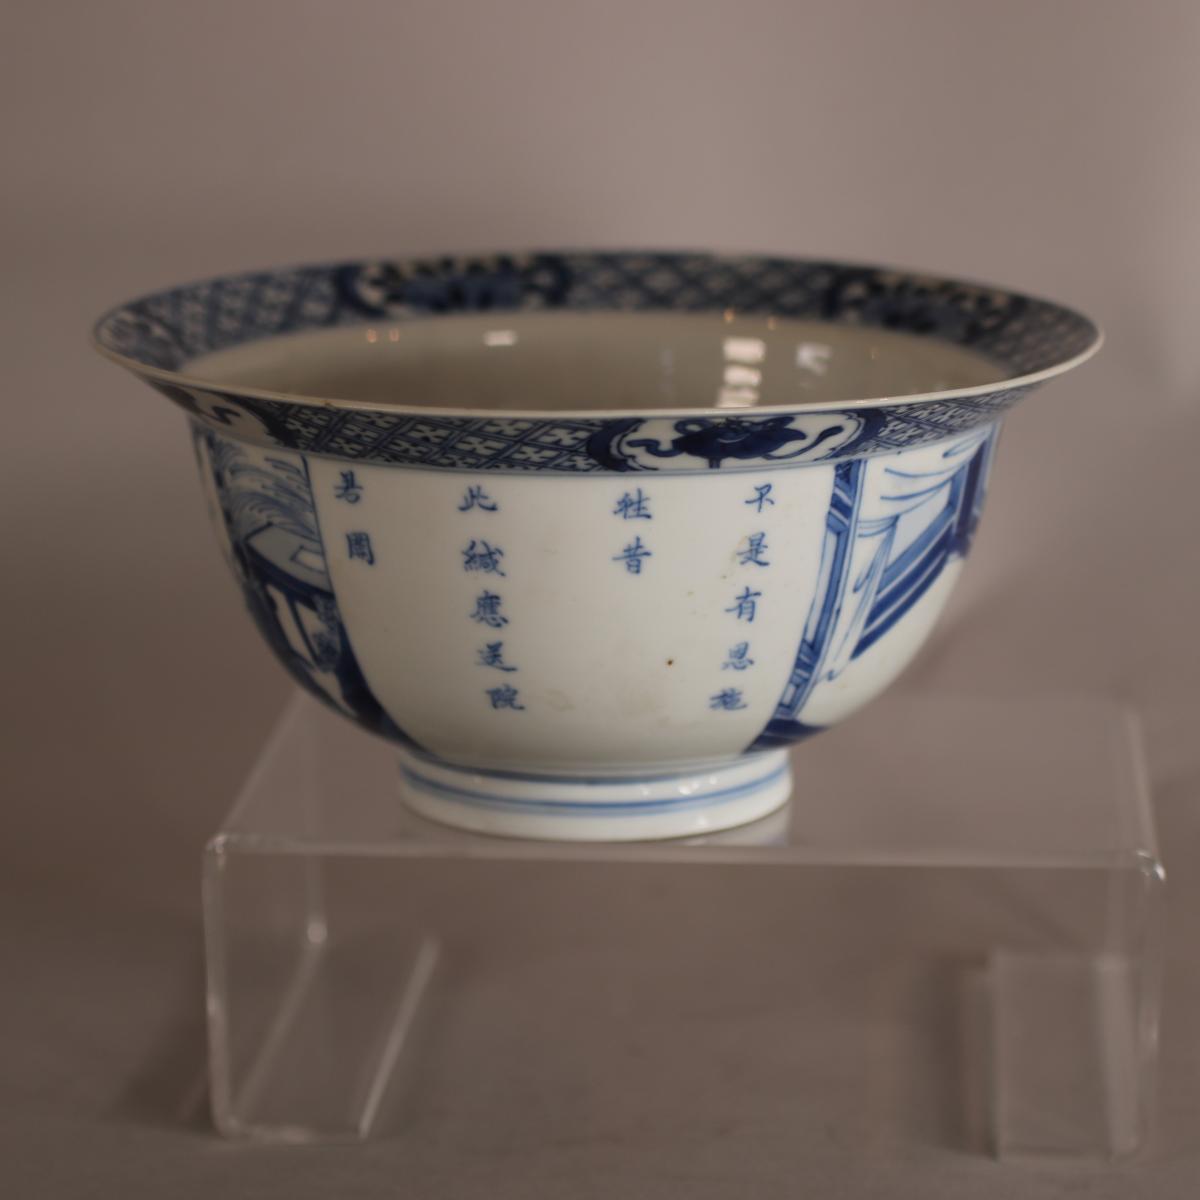 Side of Kangxi blue and white bowl showing inscription